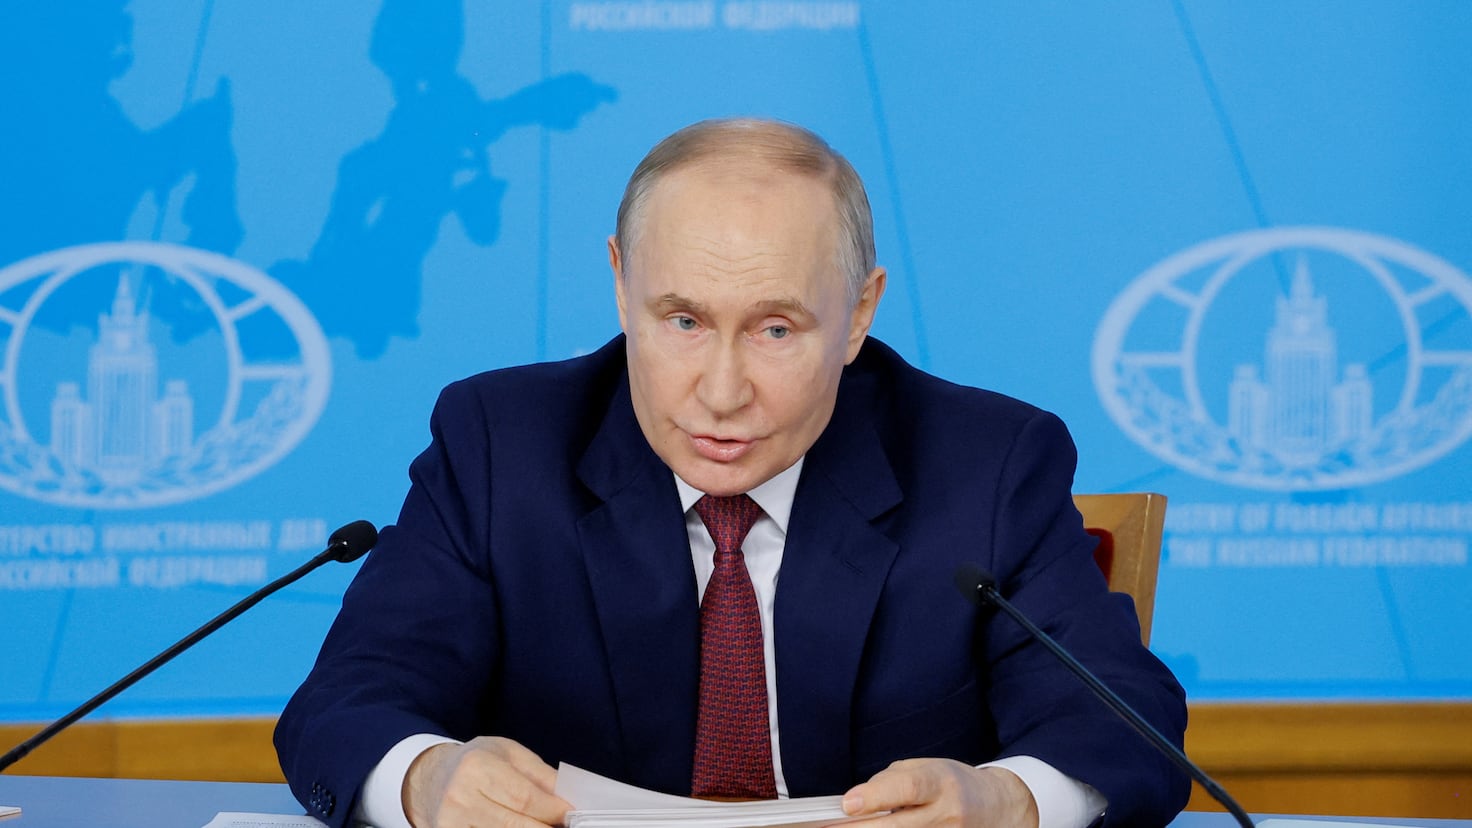 Putin makes two demands on Ukraine to order a ceasefire
